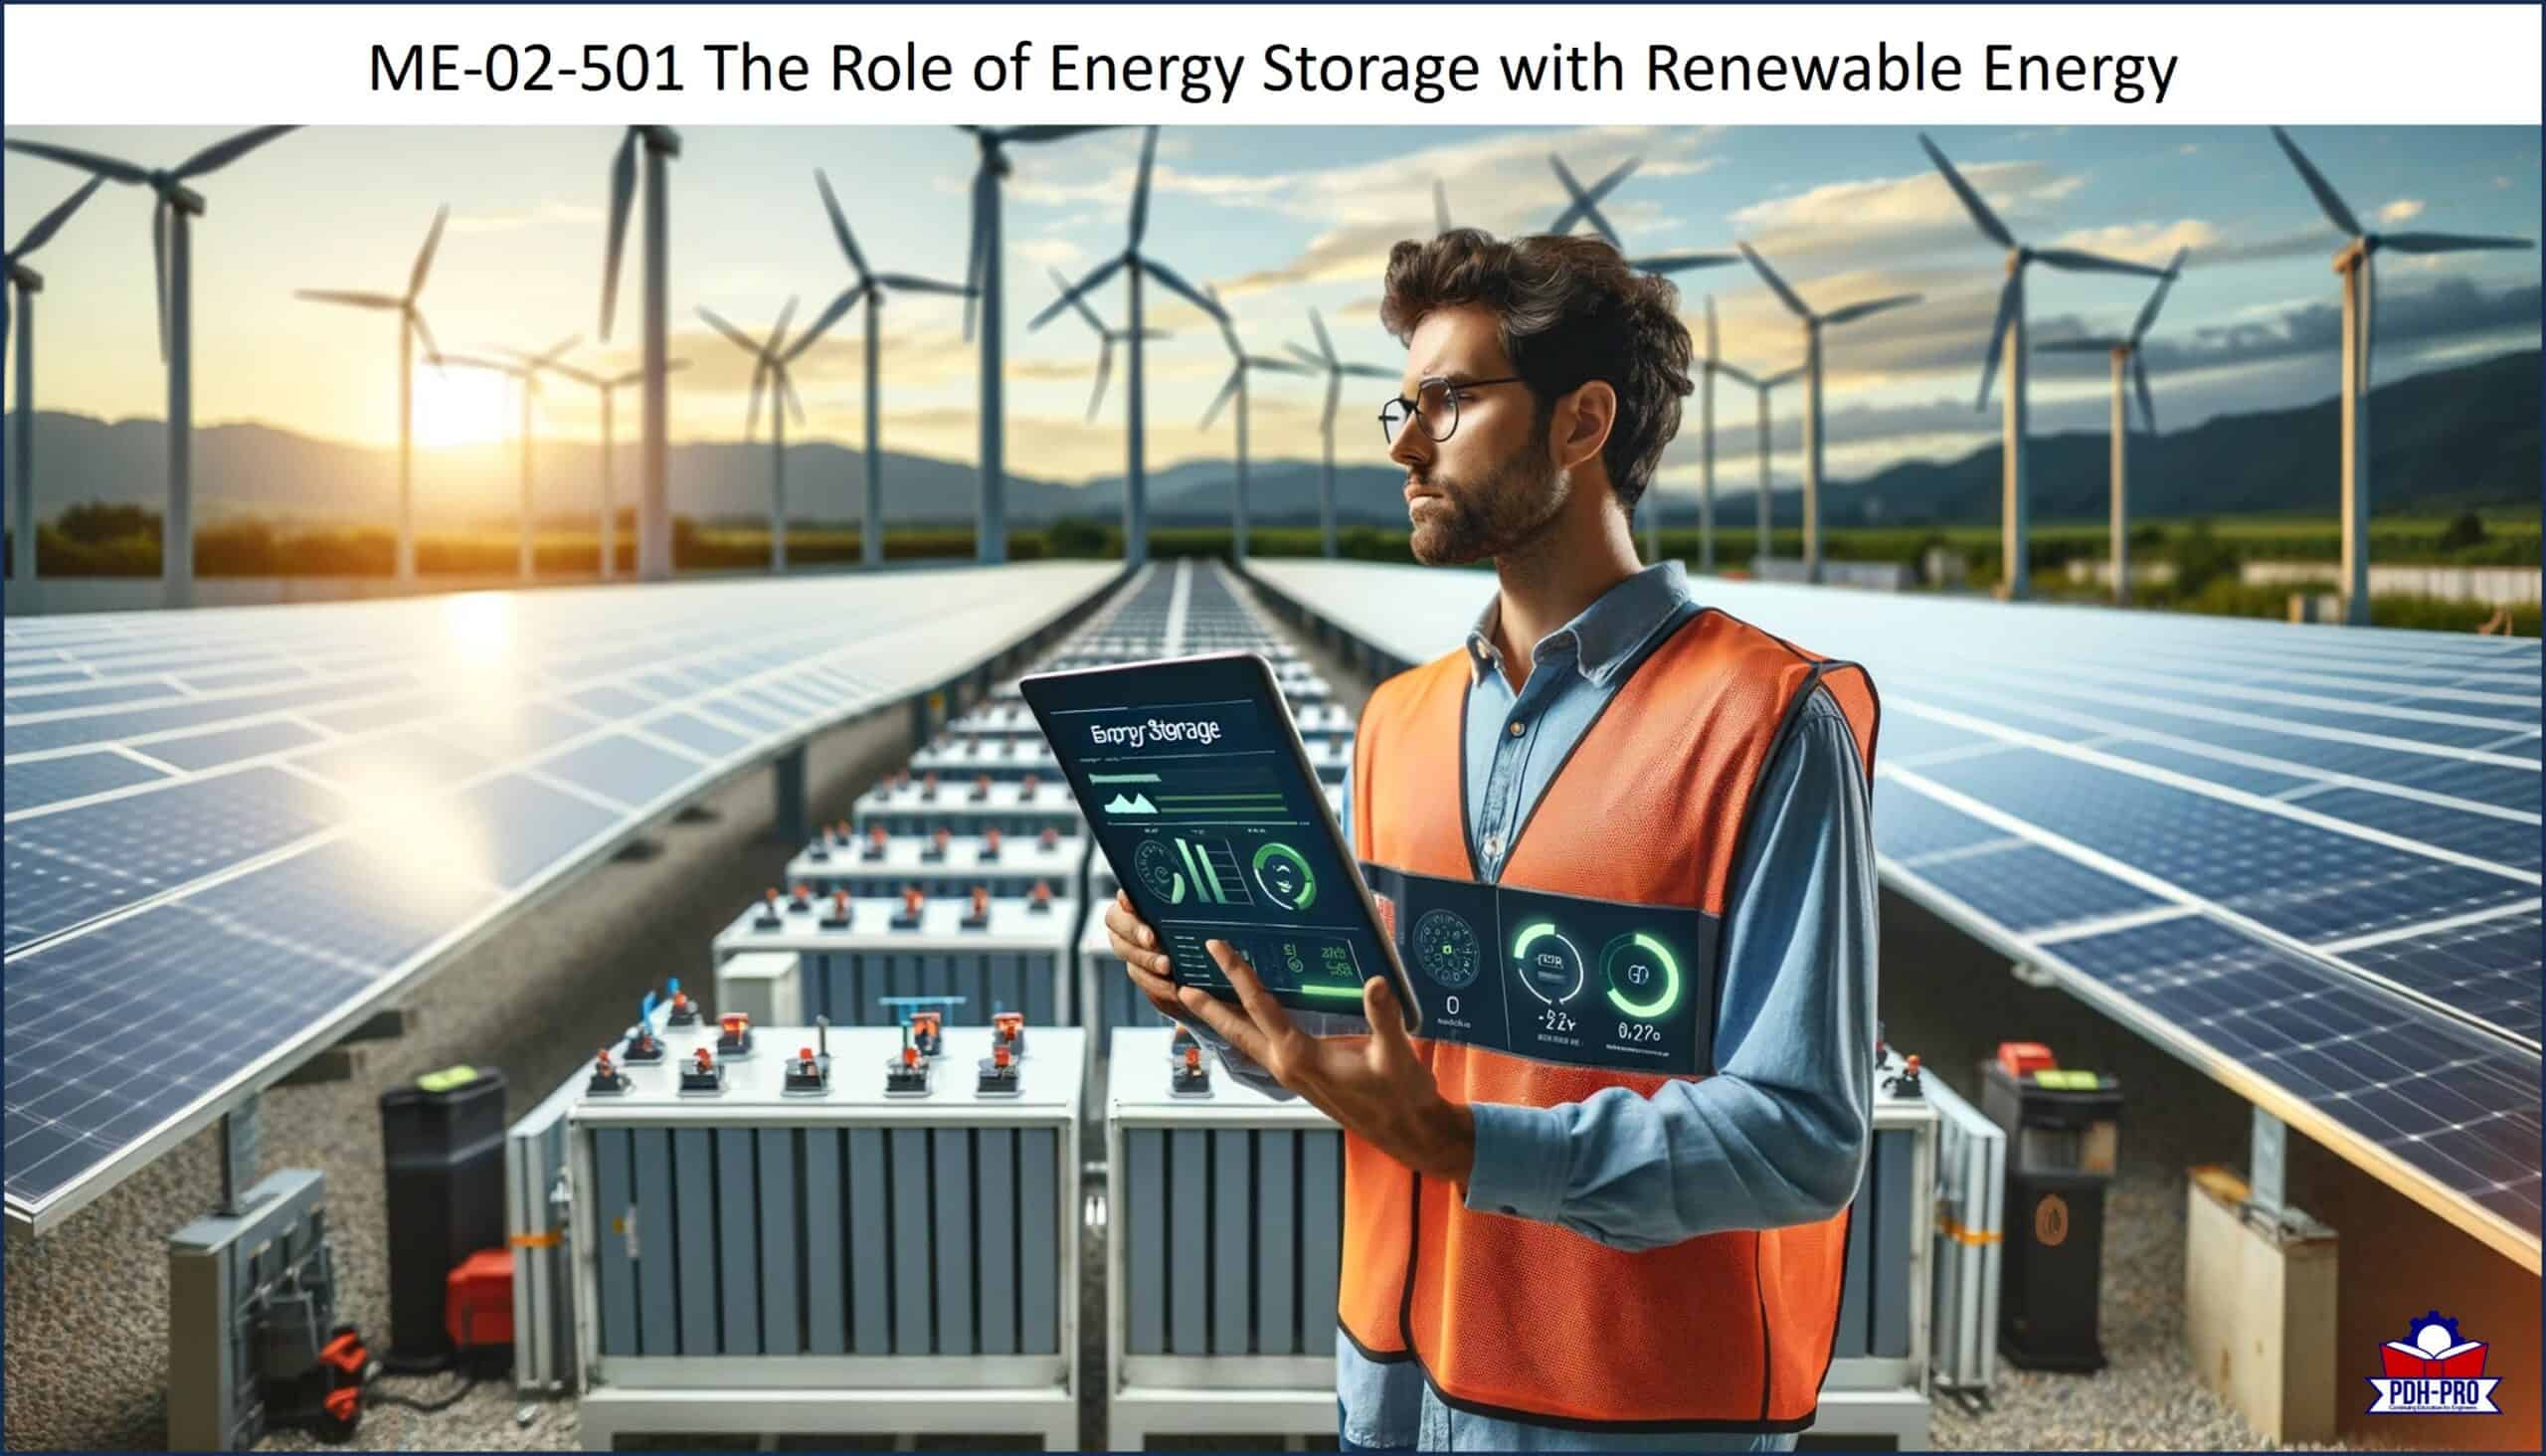 The Role of Energy Storage with Renewable Energy